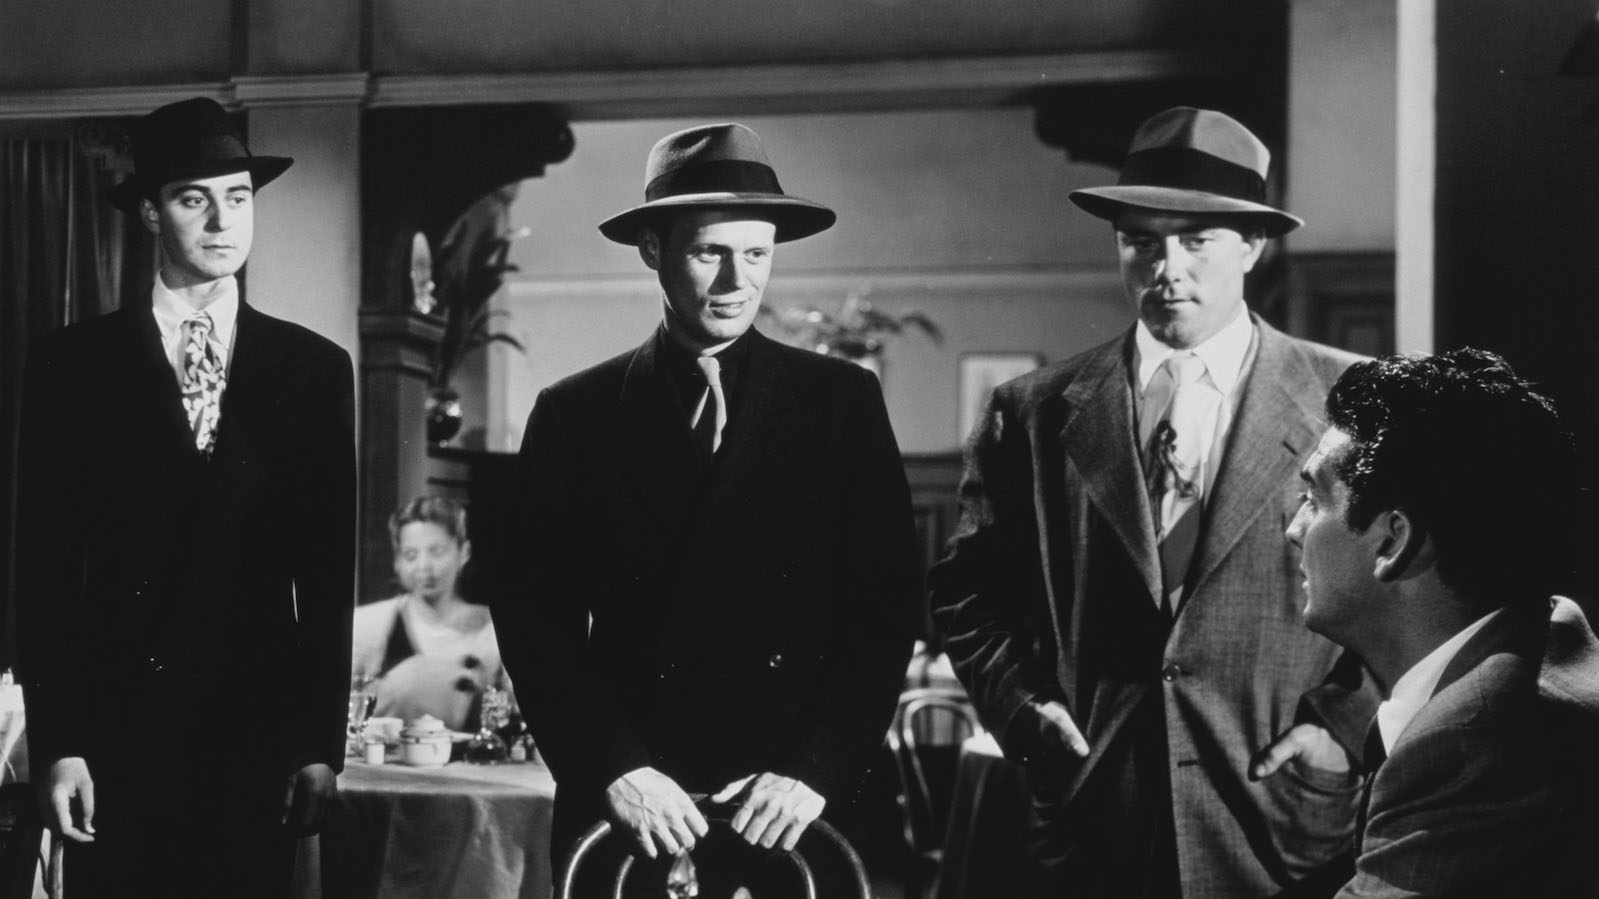 Three menacing gangsters in fedoras hover over a man sitting at a restaurant table in a black and white image